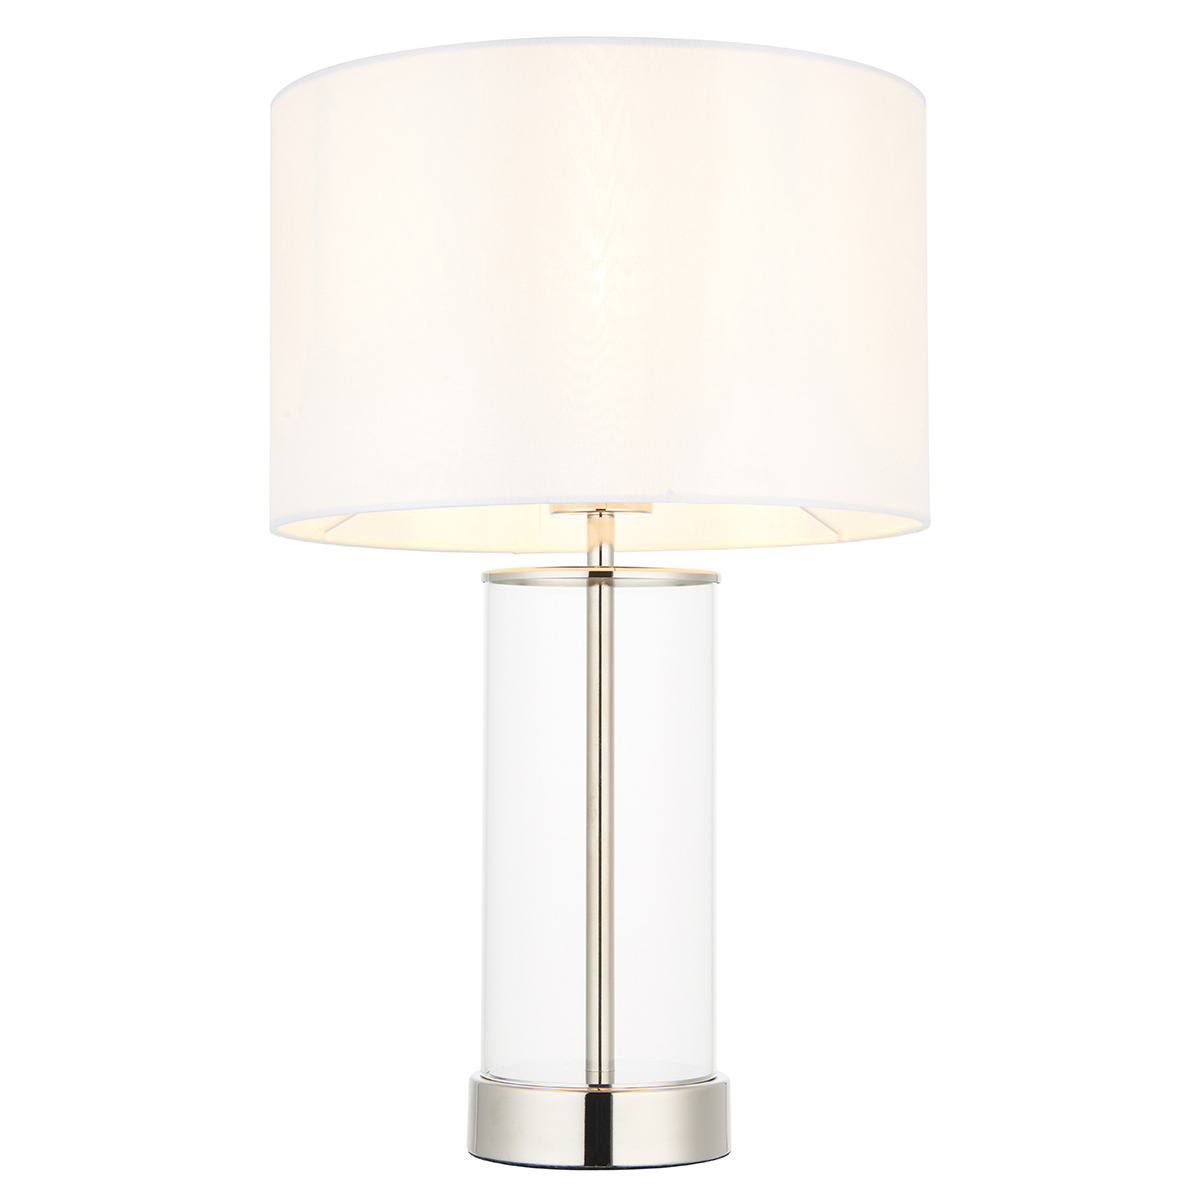 Agatha Clear Glass Table Lamp in Bright Nickel